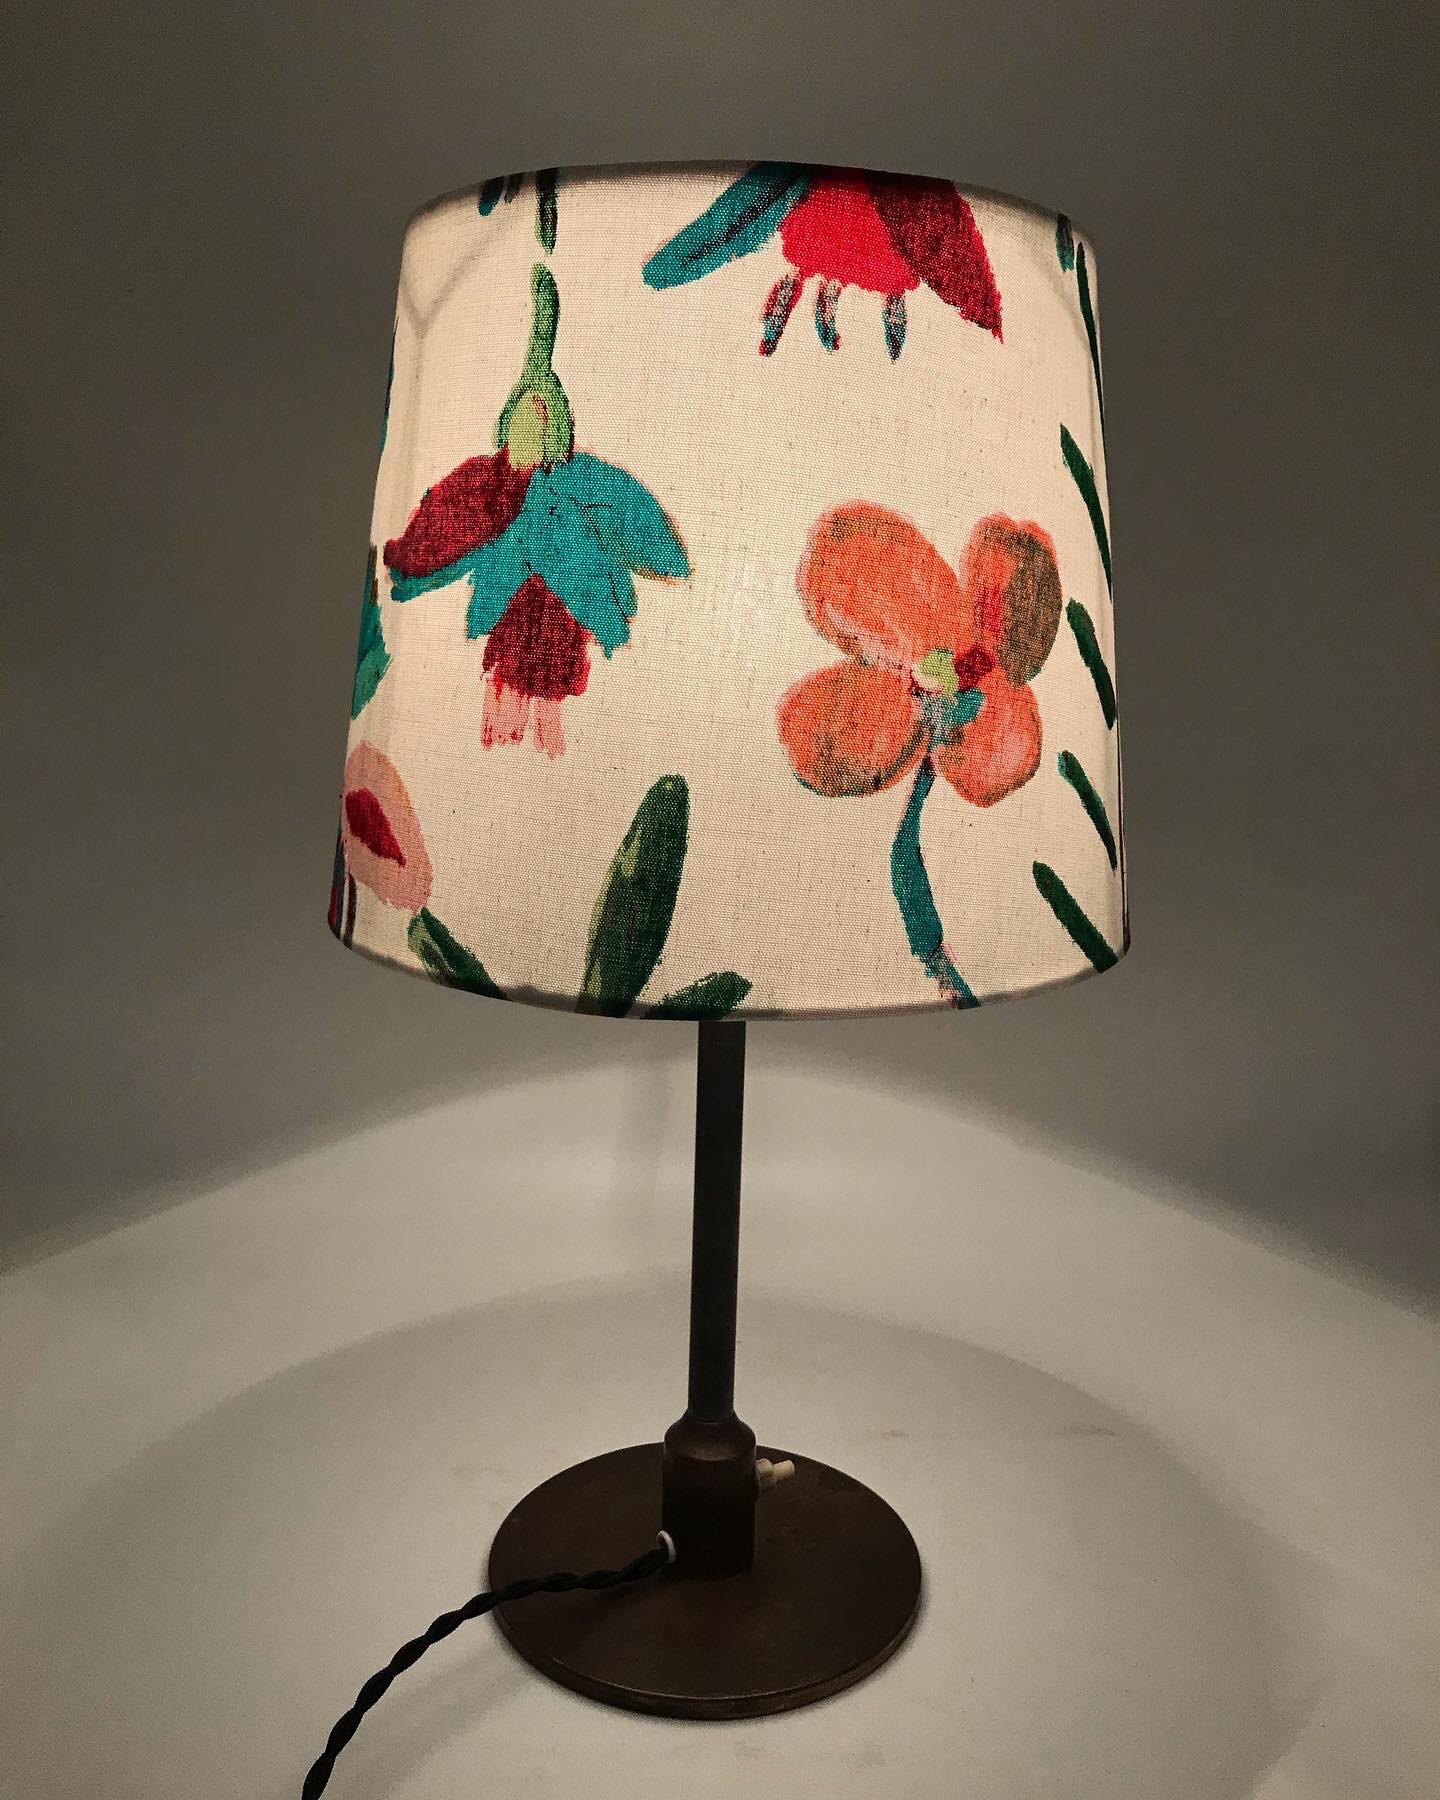 Danish Fog & Mørup table lamp in brass and topped with a beautiful lampshade from ArtbyMaj in the manner of Josef Frank.
A lovely midcentury table lamp in Danish design and quality.
Rewired and can be fitted with an EU or US plug.